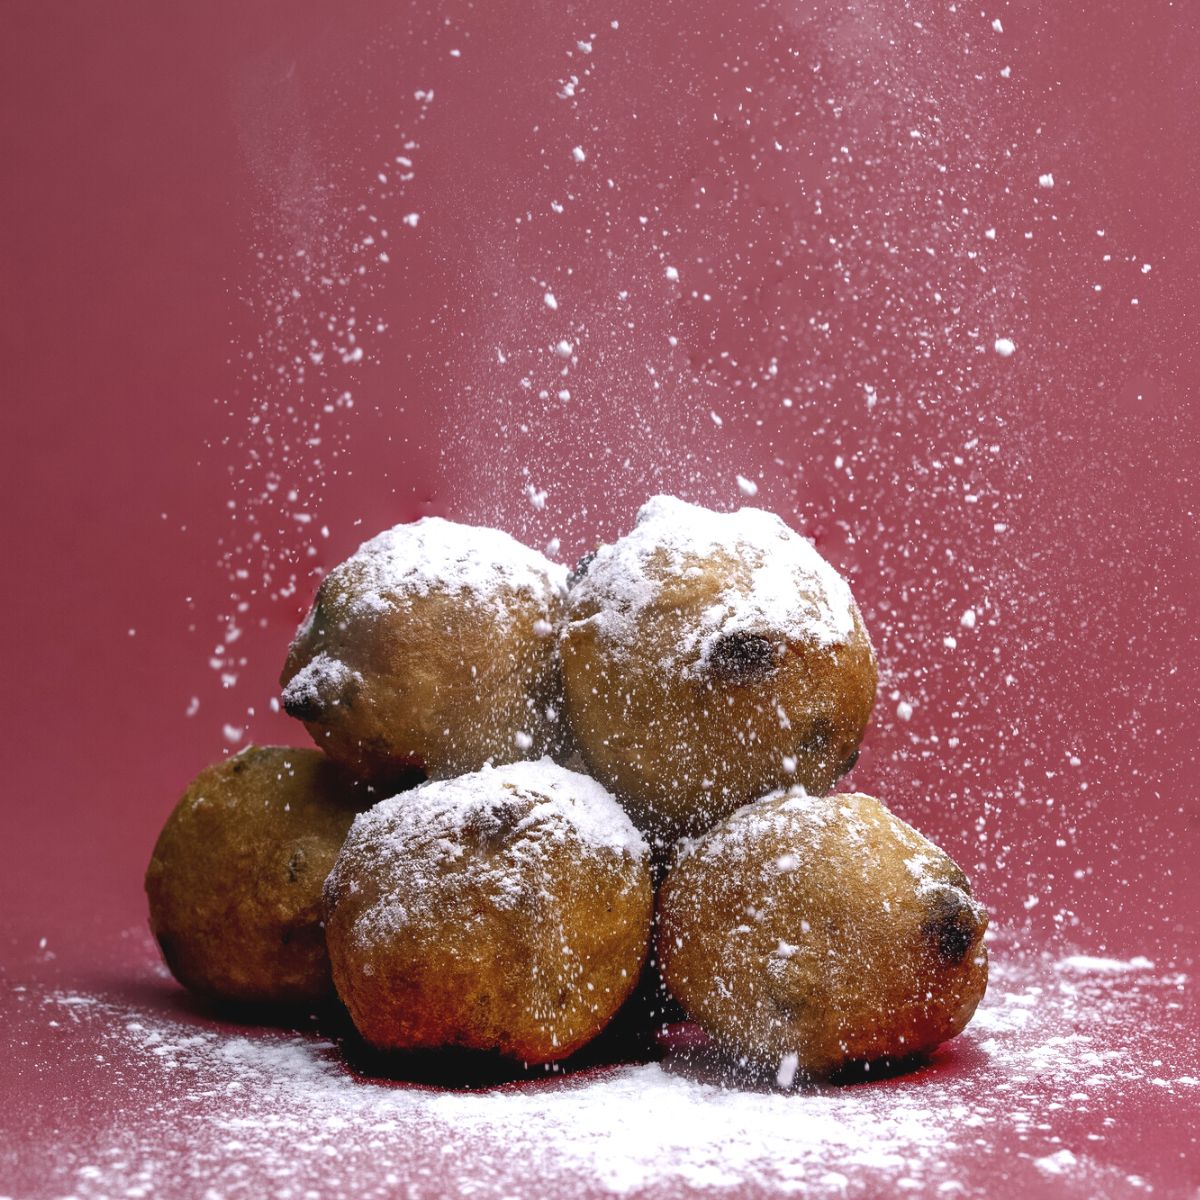 Vegetarian Dutch donuts on a red background.